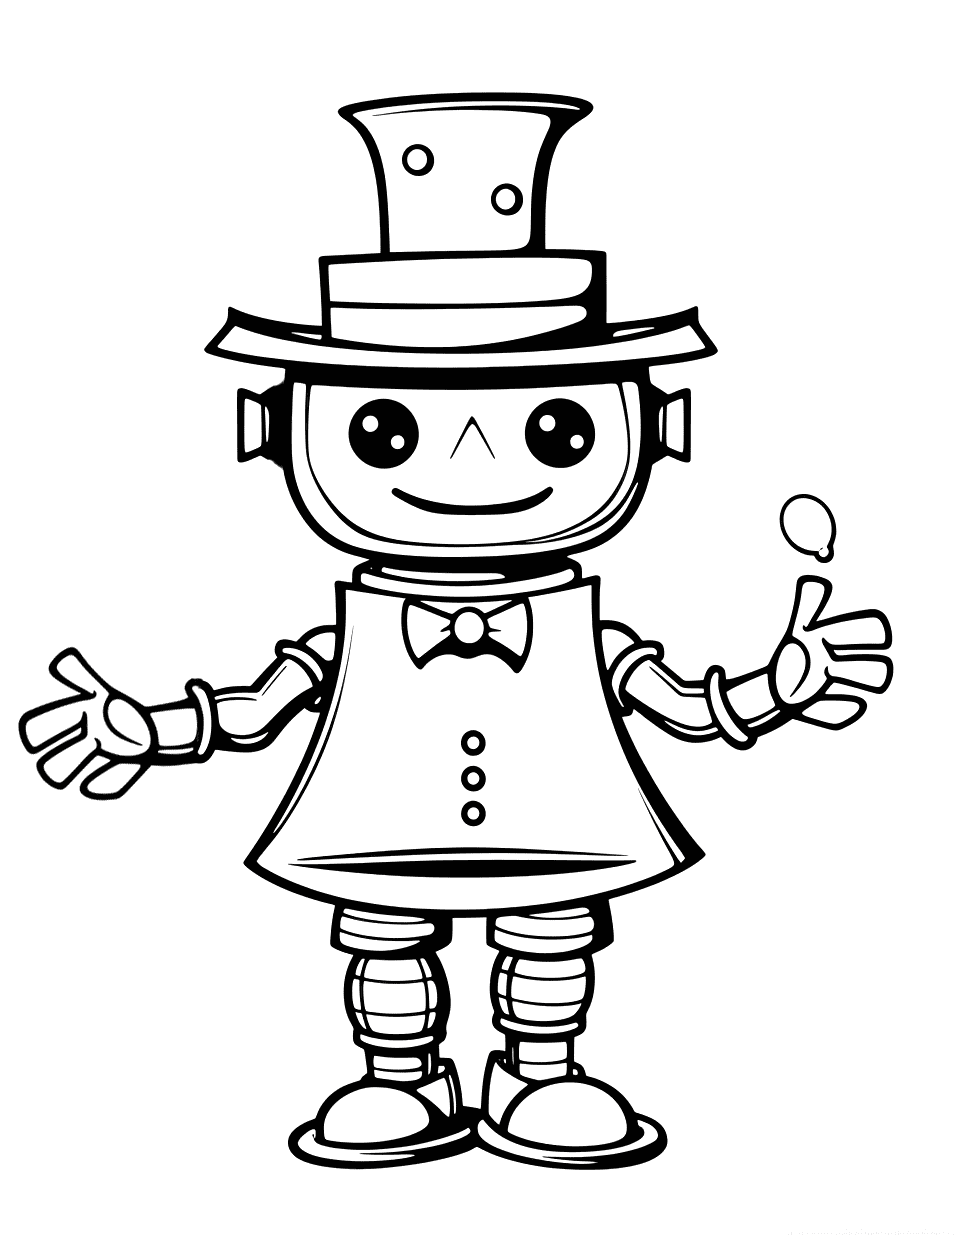 Magician Robot Performing Tricks Coloring Page - A robot wearing a magician’s hat and cape doing magic tricks.